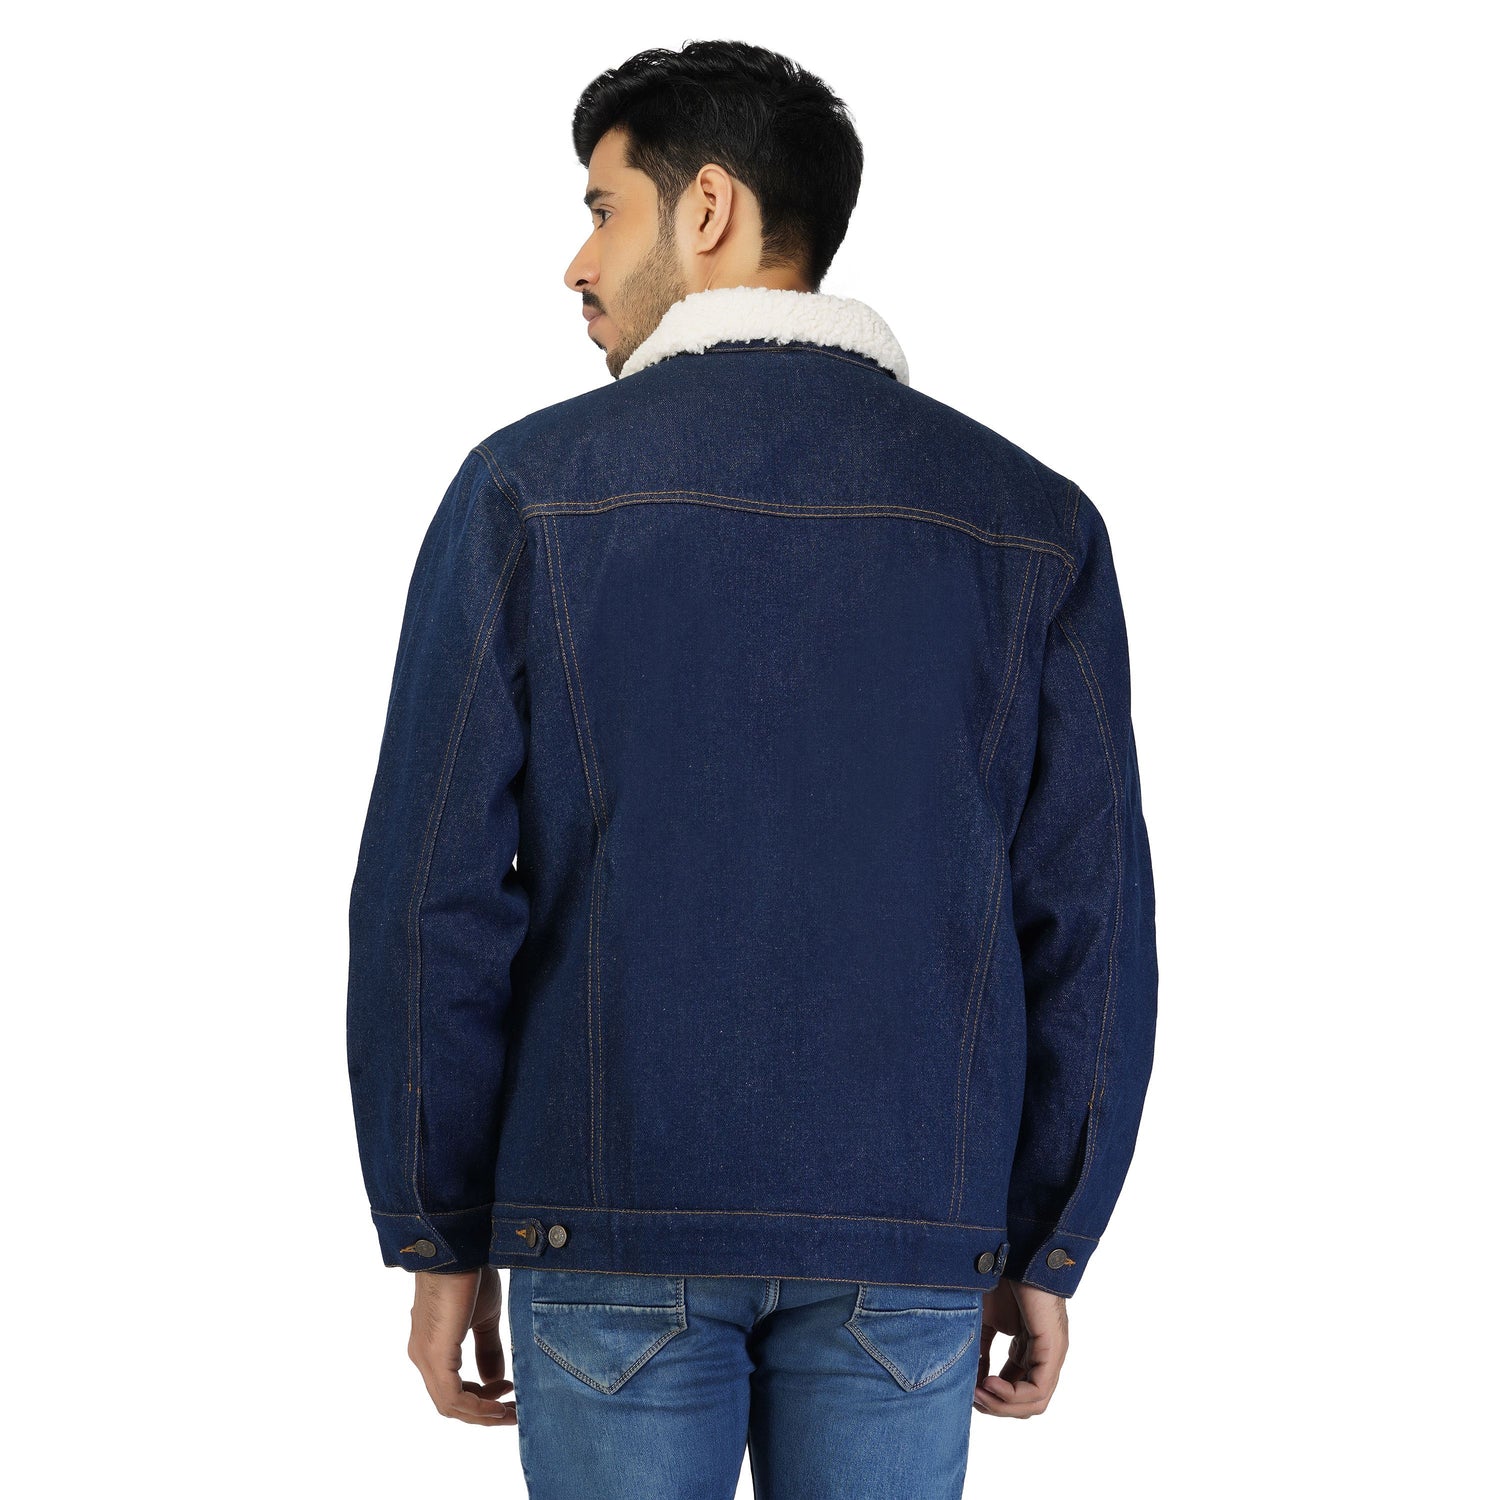 SLAY. Men's Winter wear Full Sleeves Solid Navy Blue Button-Down Denim Jacket with Faux-fur Lining-clothing-to-slay.myshopify.com-Jacket